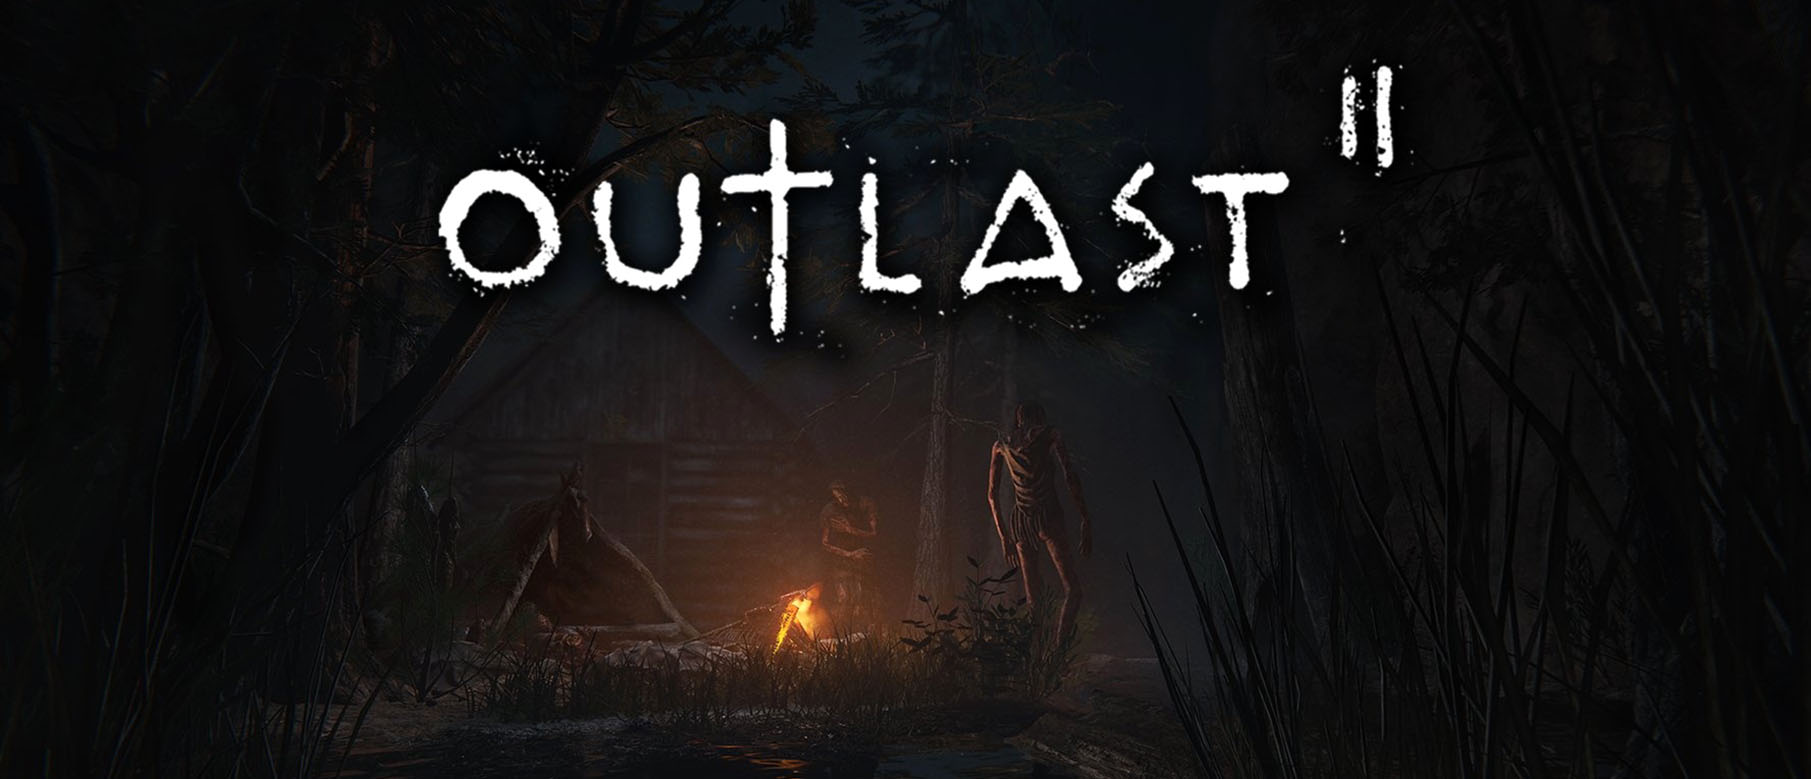 Is outlast on pc фото 74